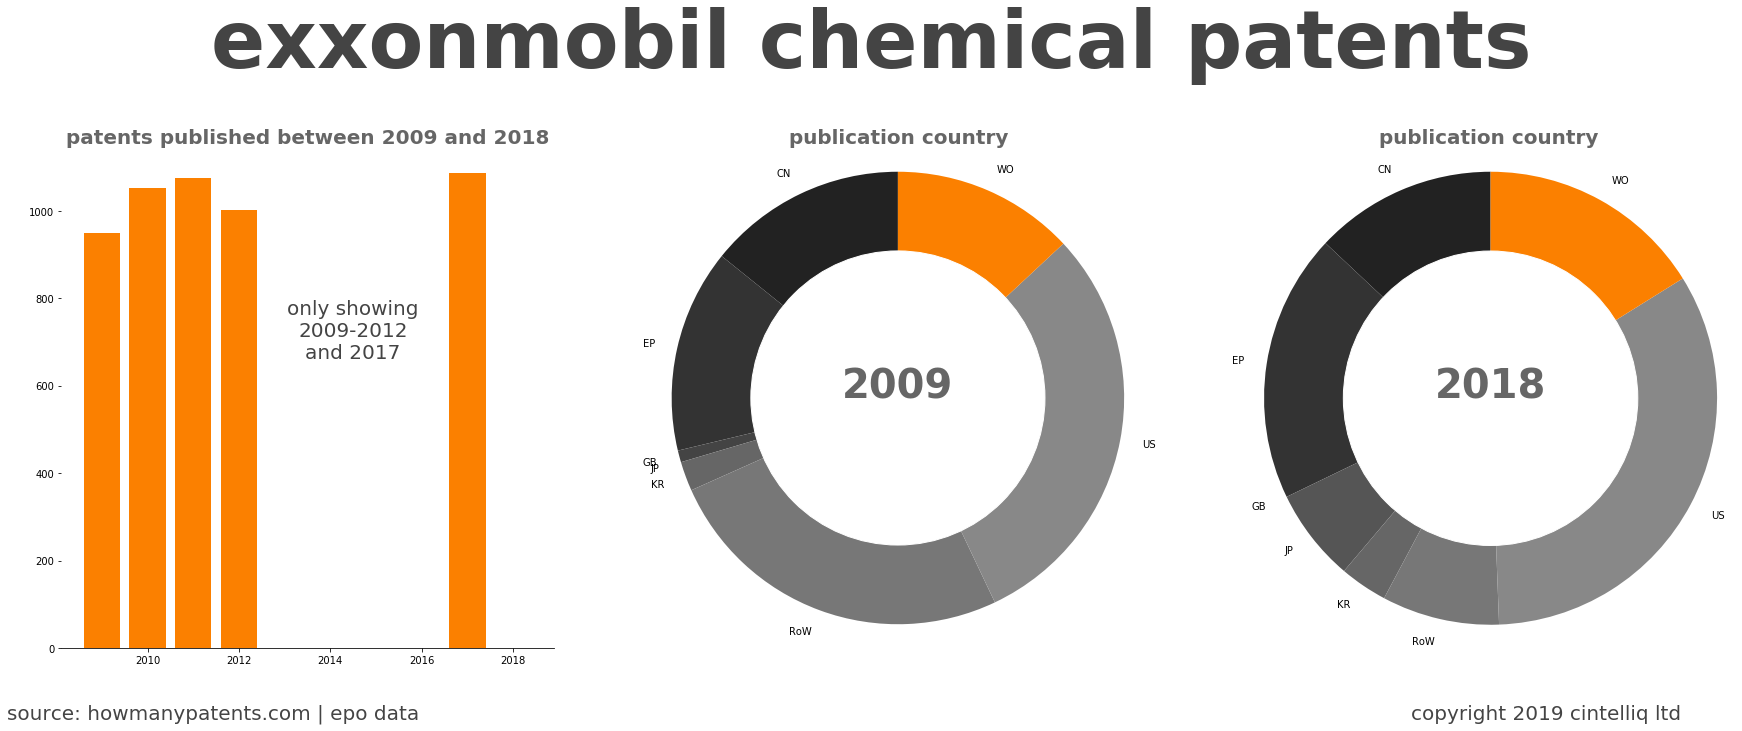 summary of patents for Exxonmobil Chemical Patents